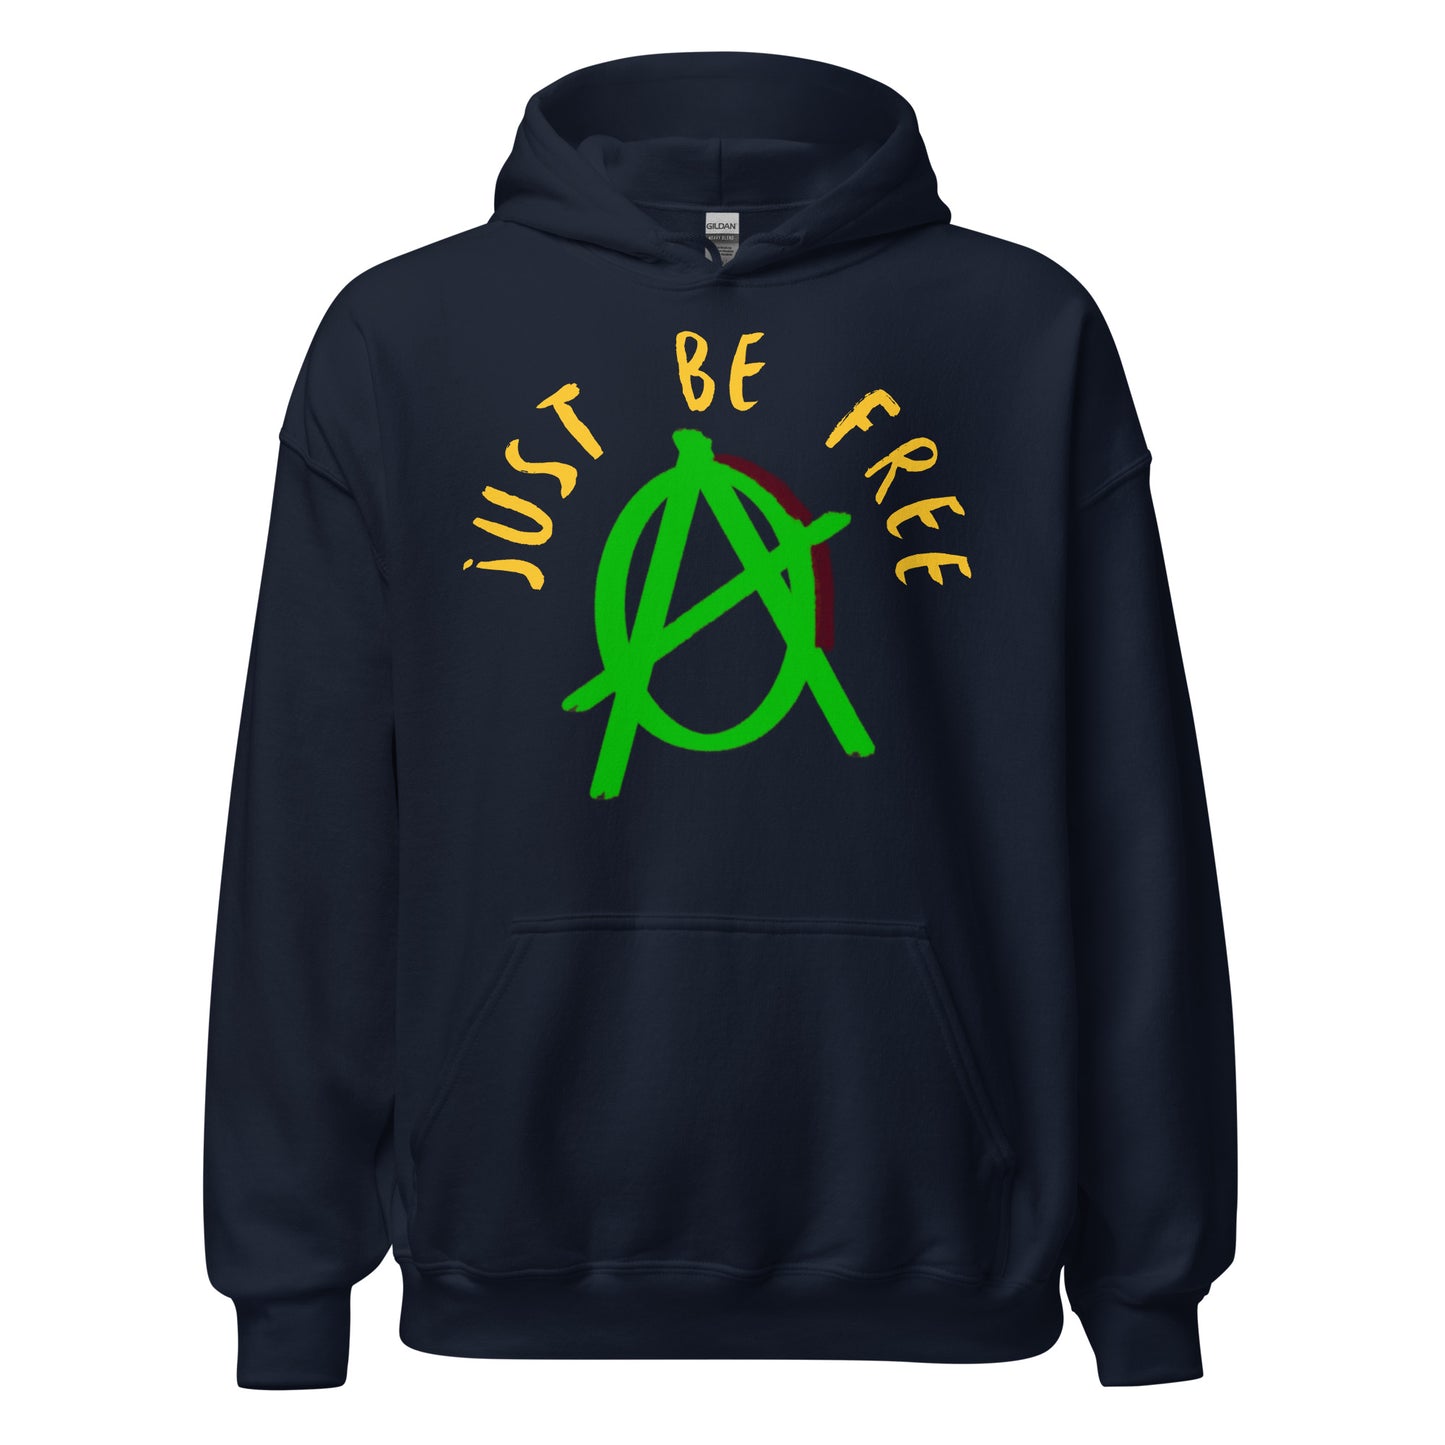 Anarchy Wear Green "Just Be Free" Hoodie